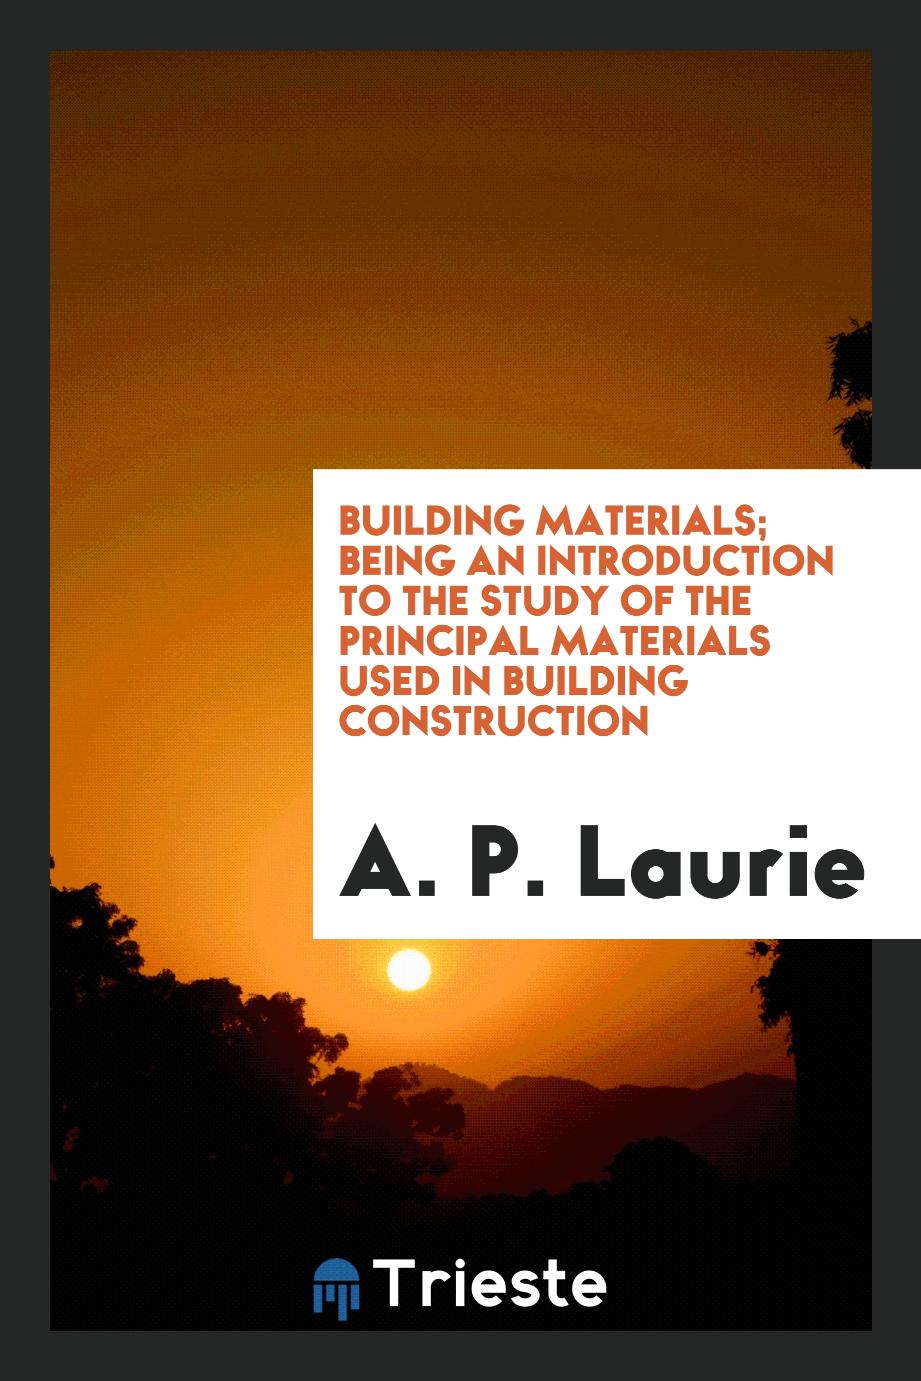 Building materials; being an introduction to the study of the principal materials used in building construction